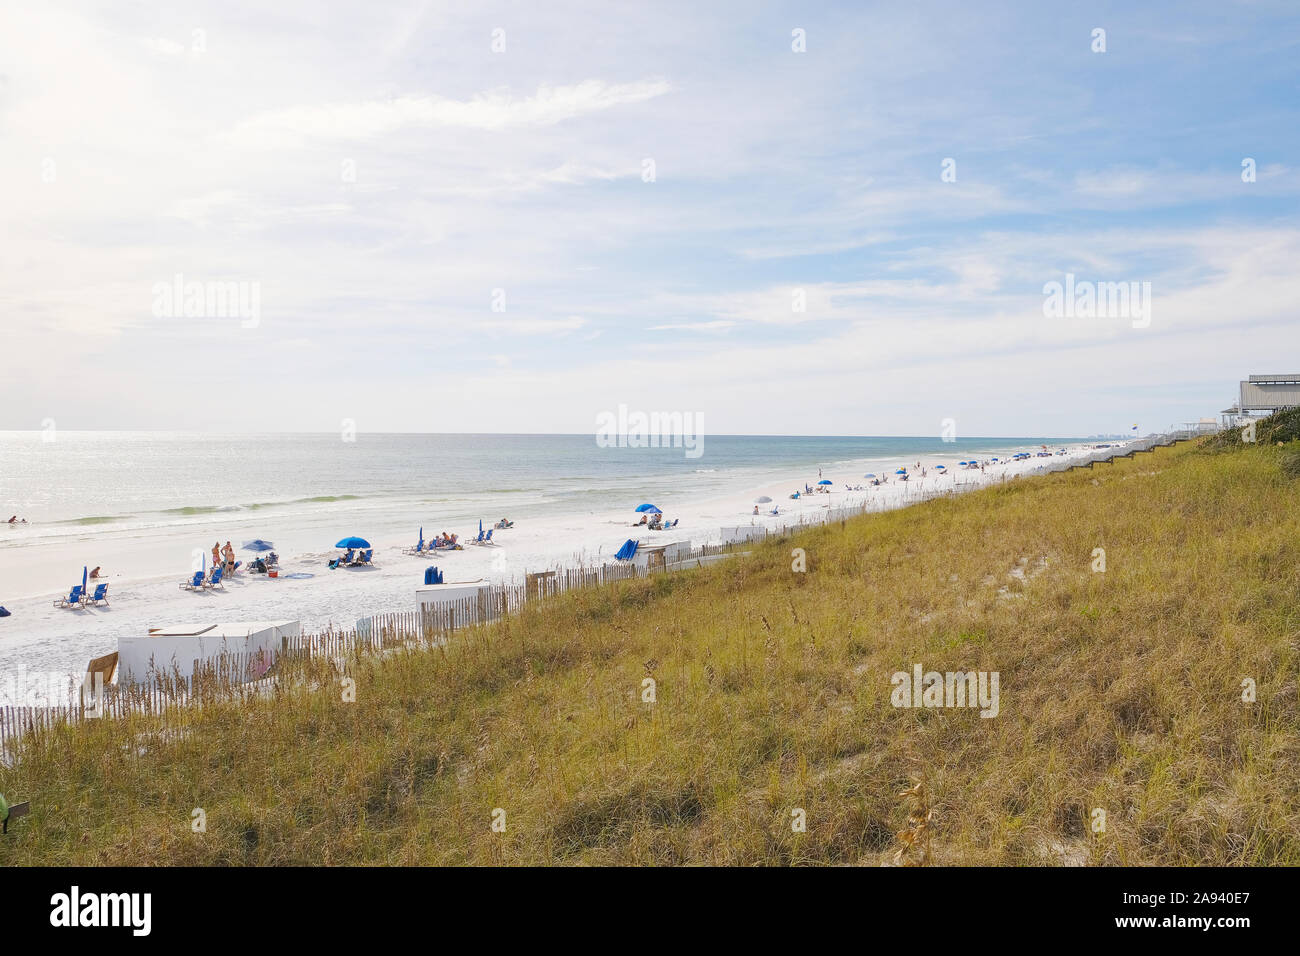 People and families enjoying the white sand beach and beaches of the Florida panhandle, Gulf of Mexico, in Seaside Florida, USA. Stock Photo